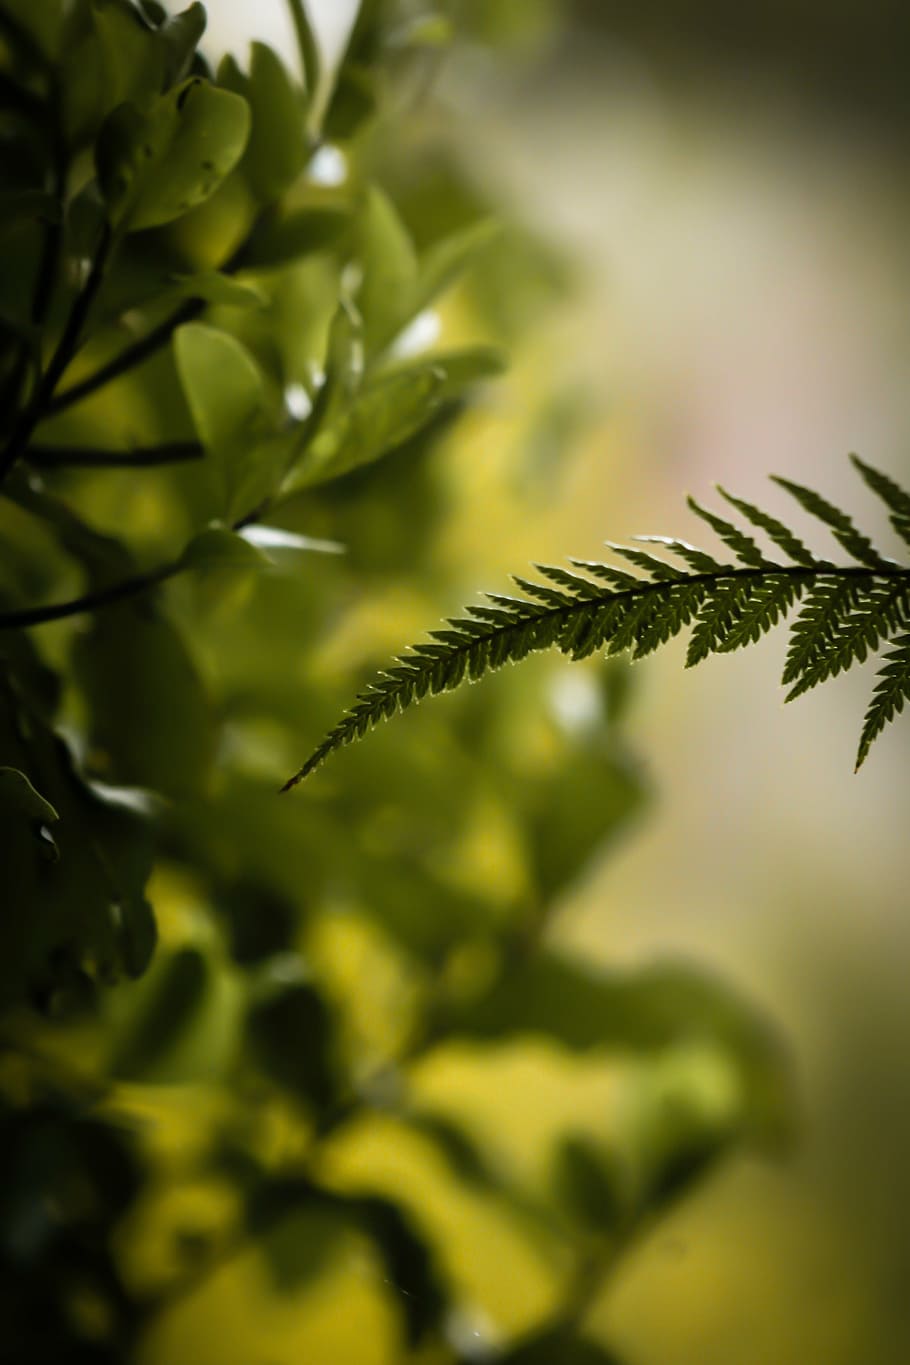 shallow, focus, green, leaf, arty, background, blurred background, curve, delicate, fern